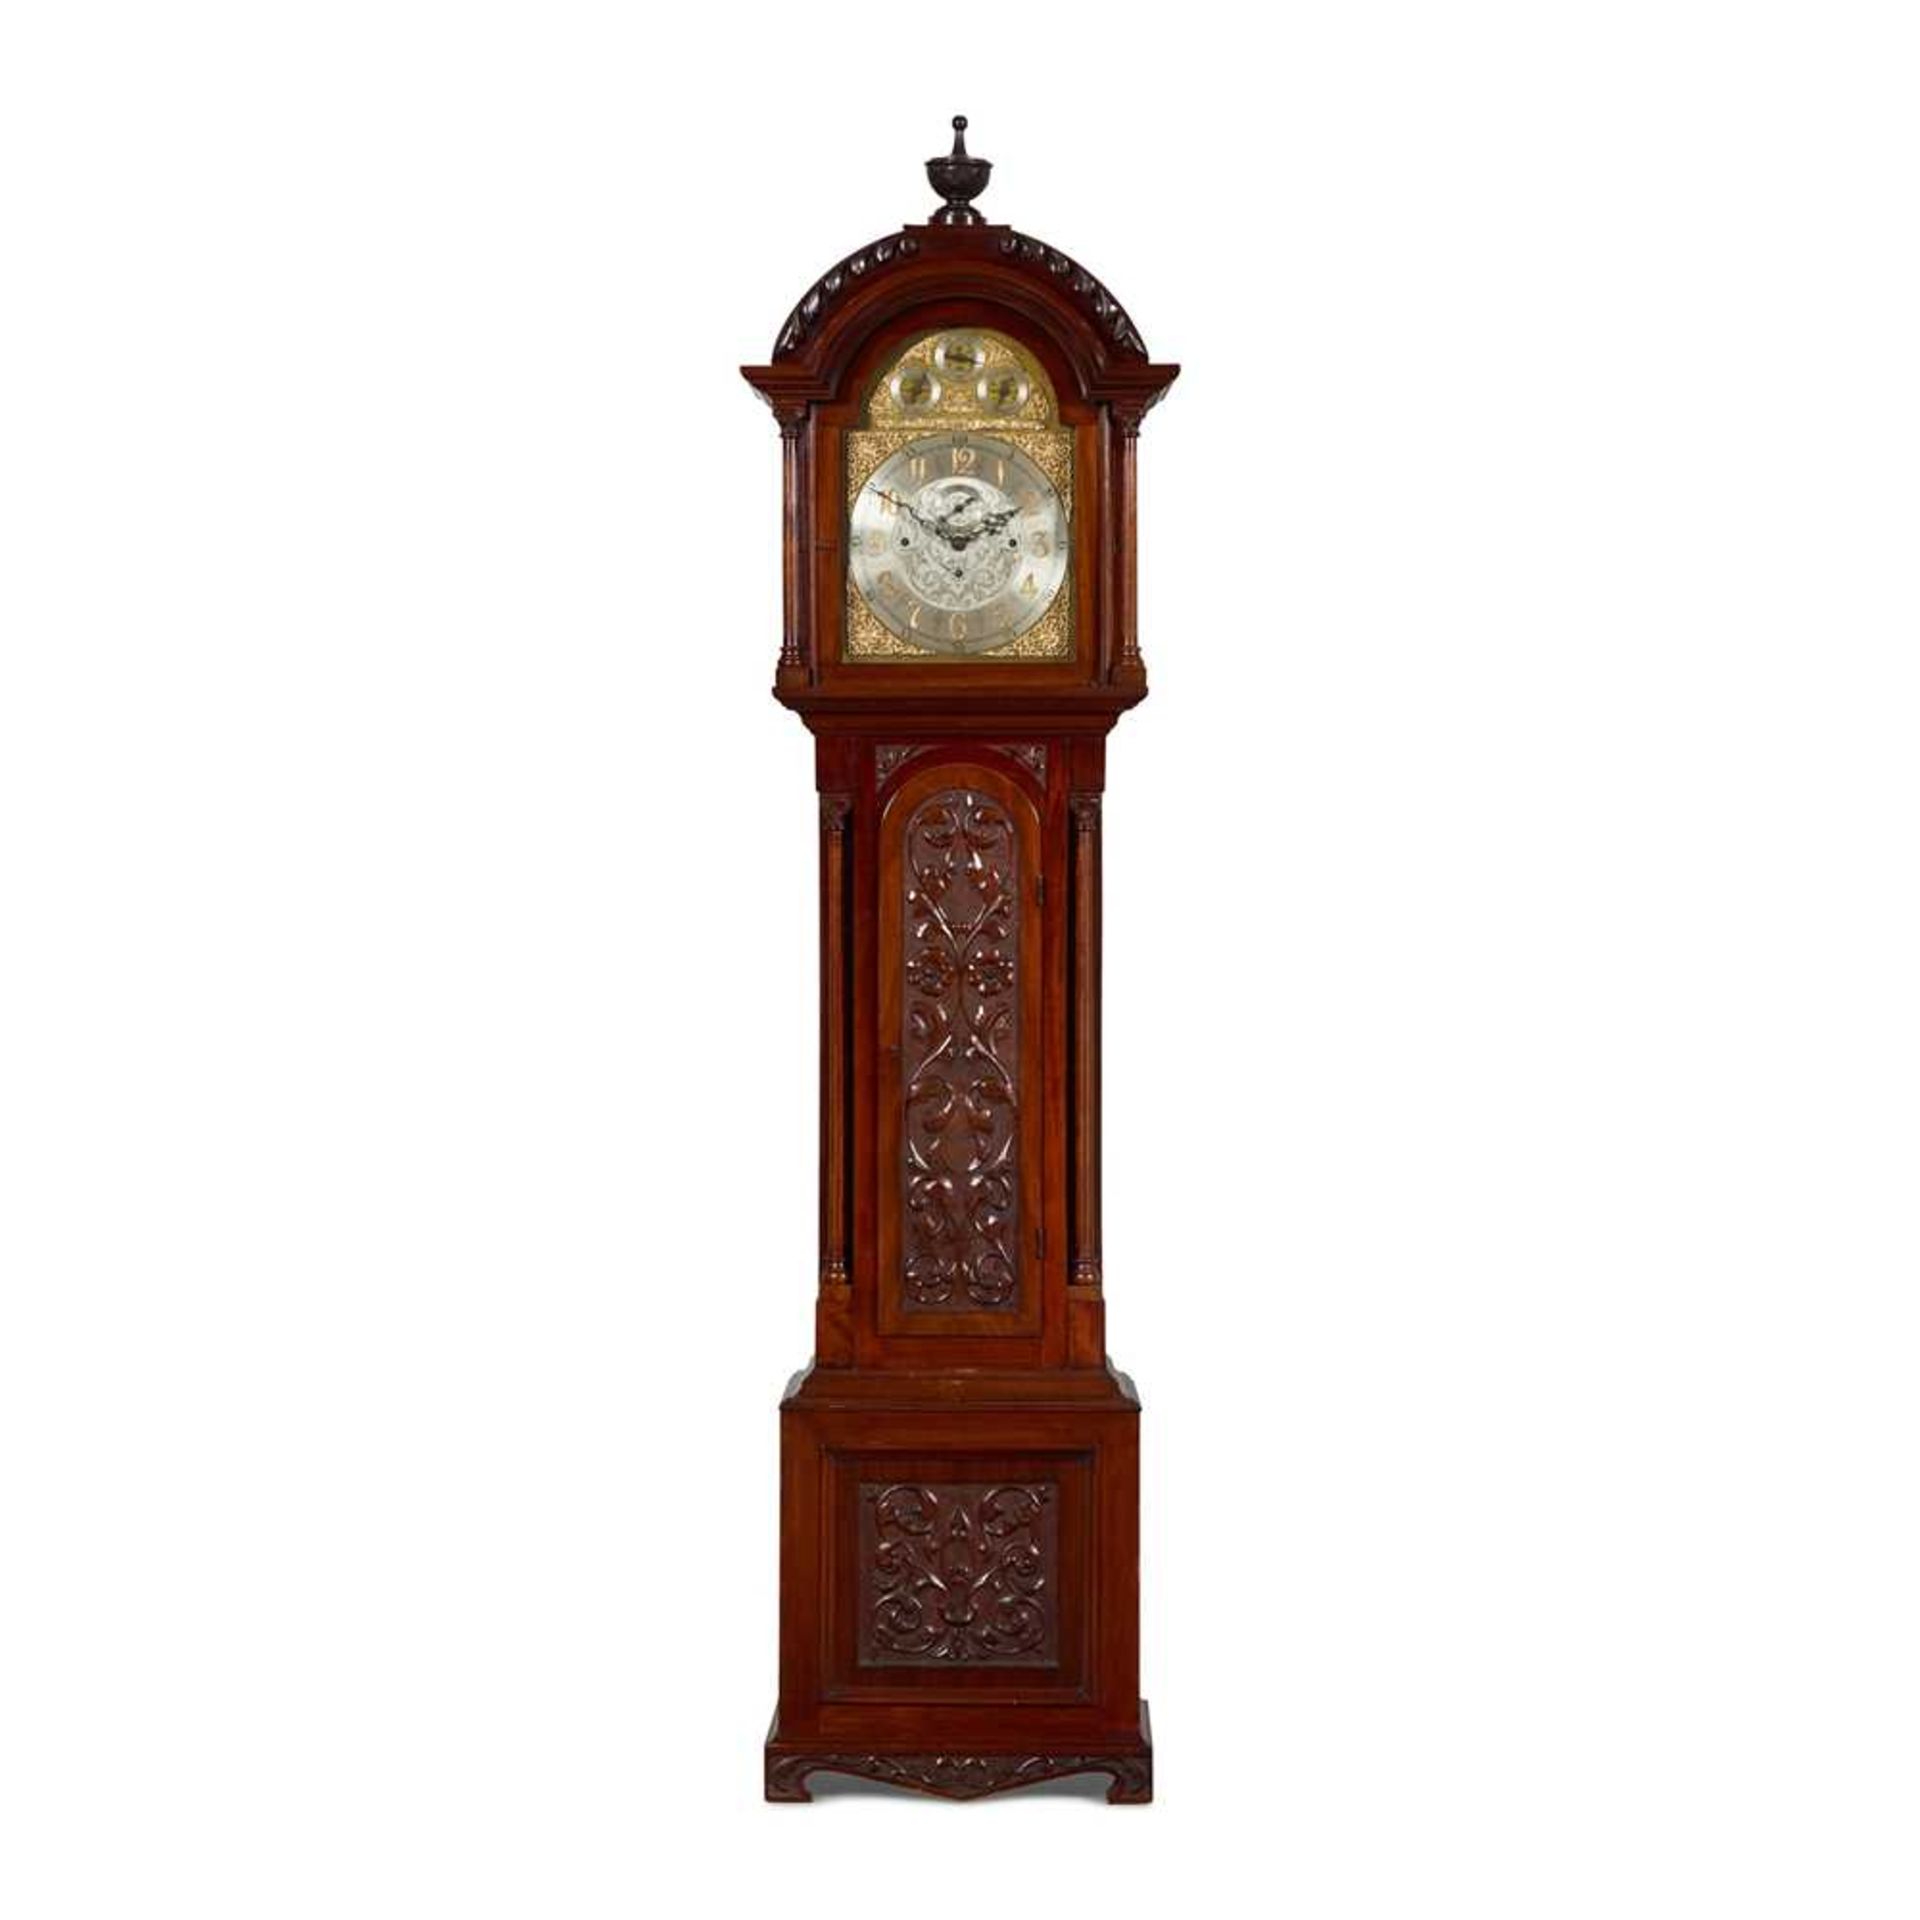 LATE VICTORIAN CHIMING LONGCASE CLOCK, W.F. EVANS & SONS, HANDSWORTH LATE 19TH CENTURY